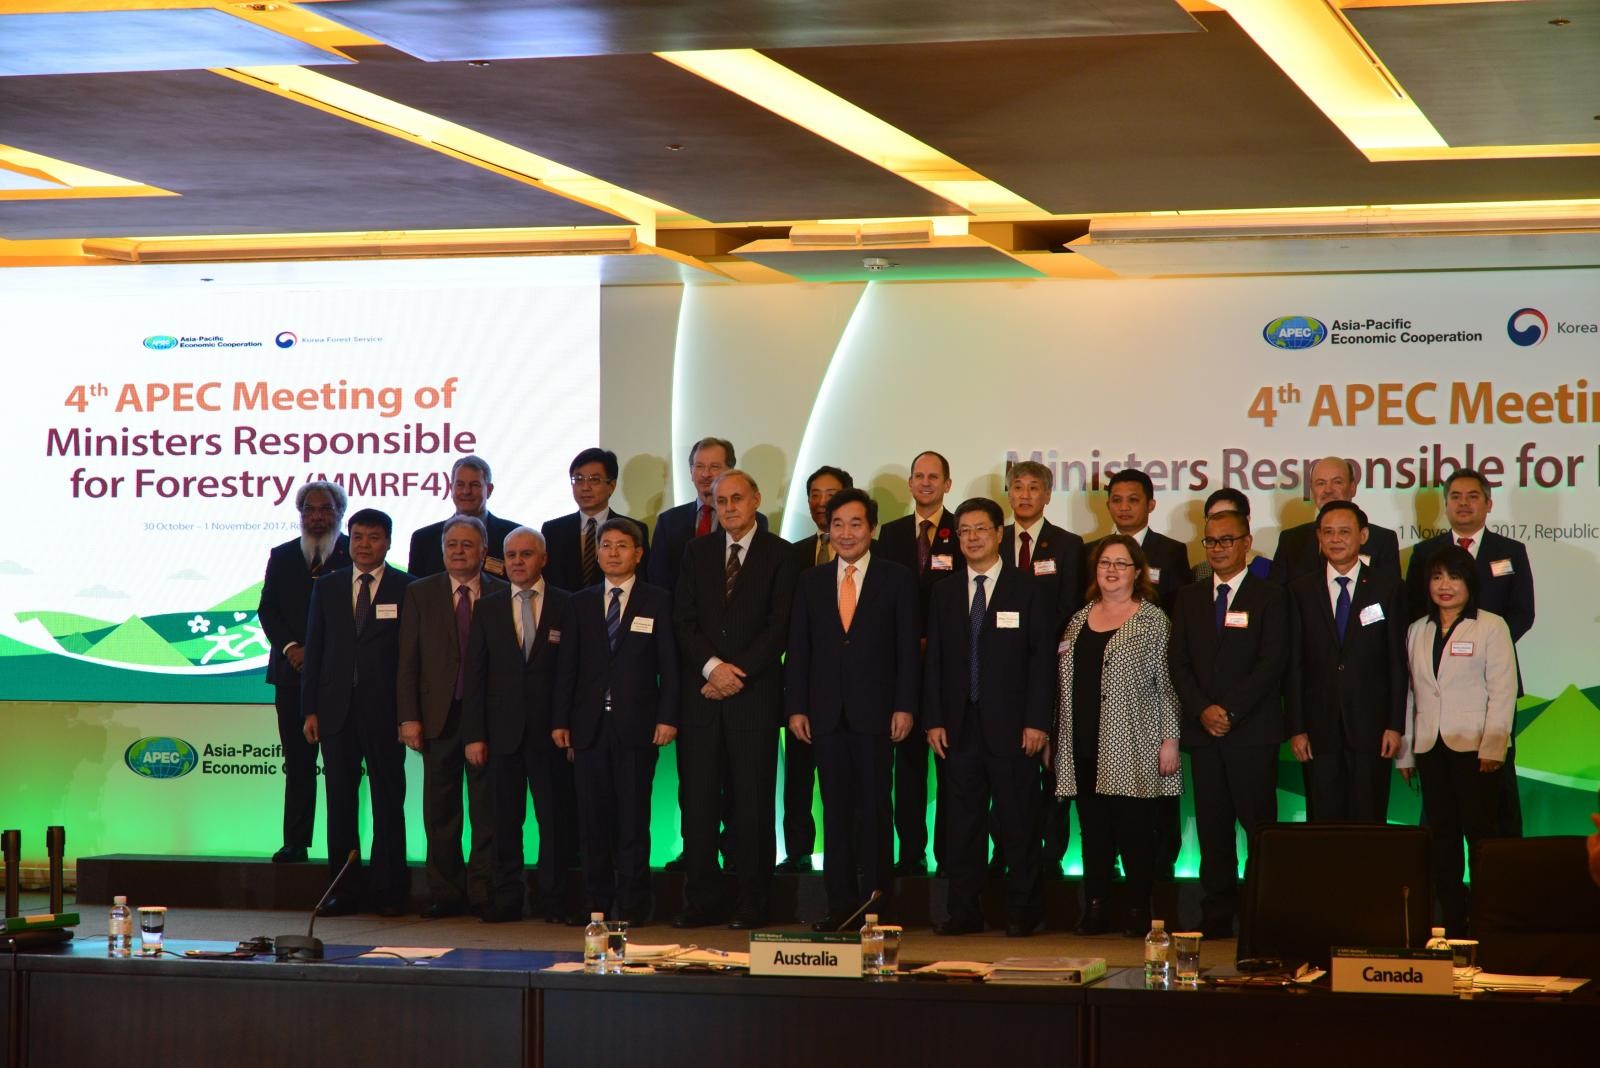 In response to the 2017 APEC theme, “Creating New Dynamism, Fostering a Shared Future”, the MMRF4 opened a dialogue with private-sector organizations with respect to increasing forest coverage area in the Asia-Pacific region, promoting cooperation in combating illegal logging and associated trade, creating forest-based jobs, bringing into the concept of foresr welfares, and sharing the future prospects of forests.